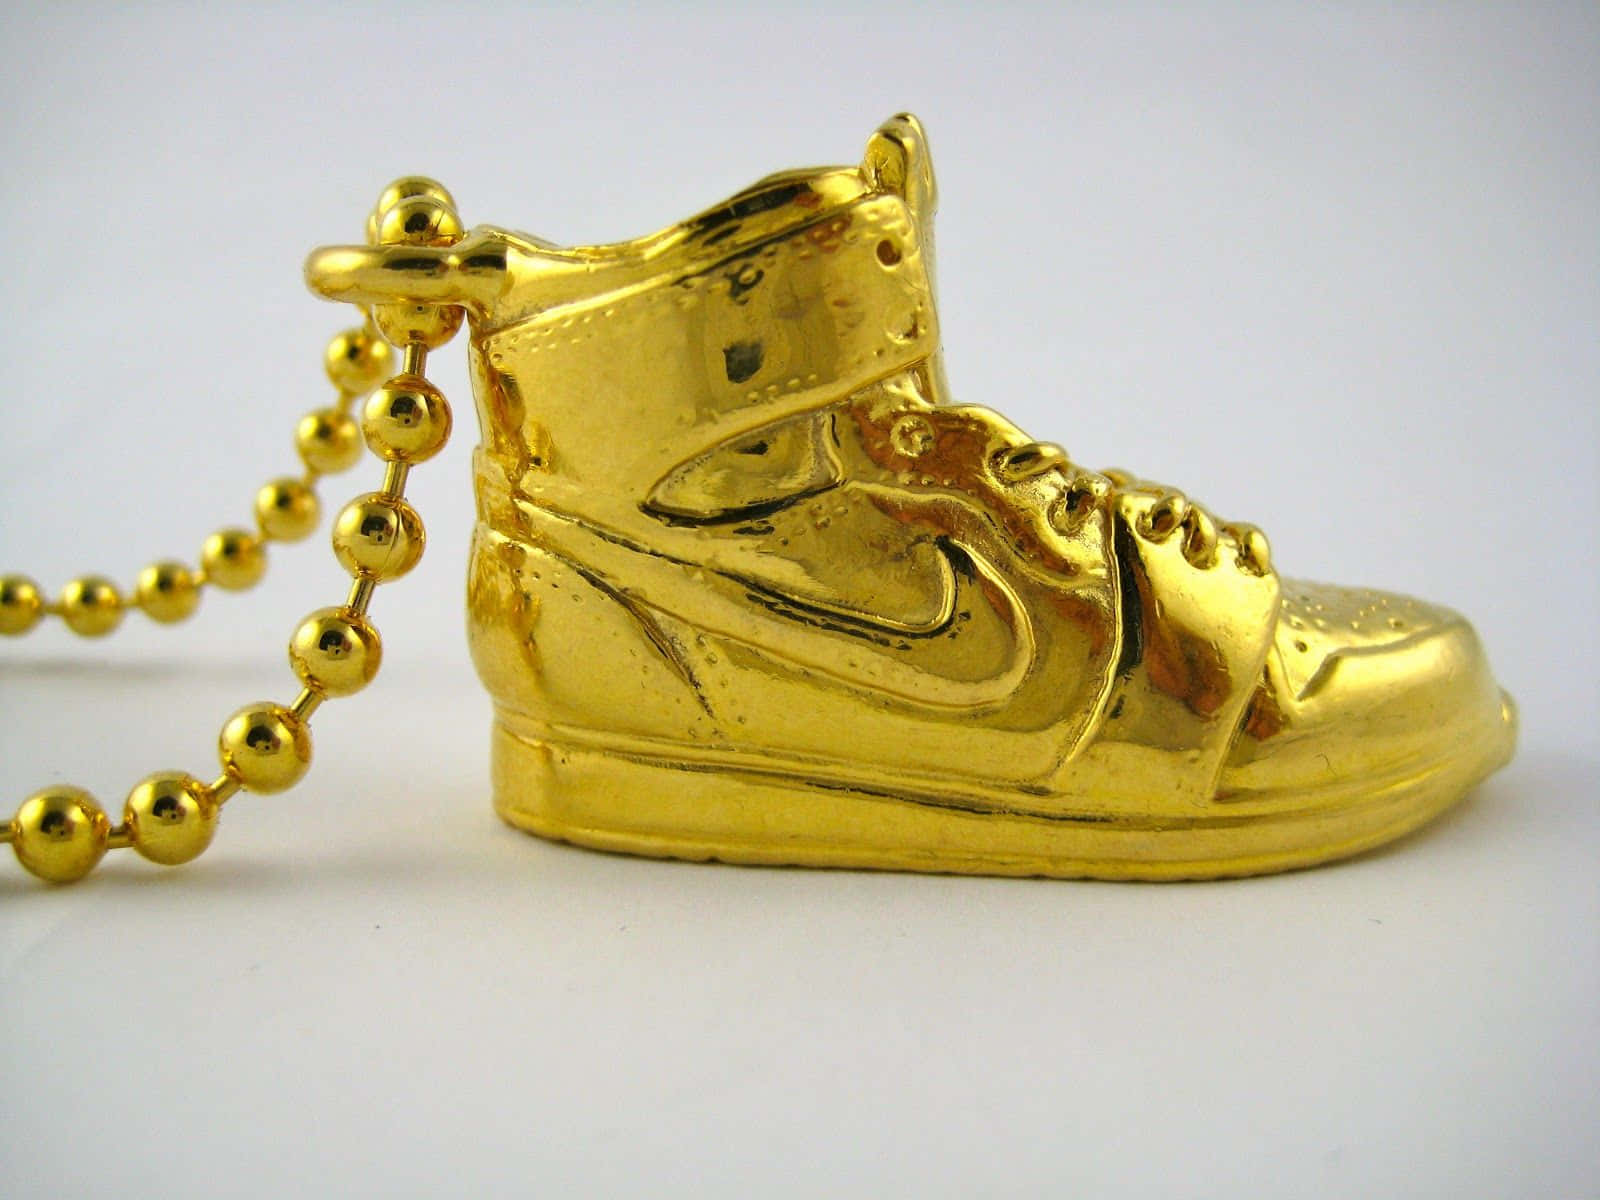 A Gold Nike Shoe With A Chain On It Wallpaper